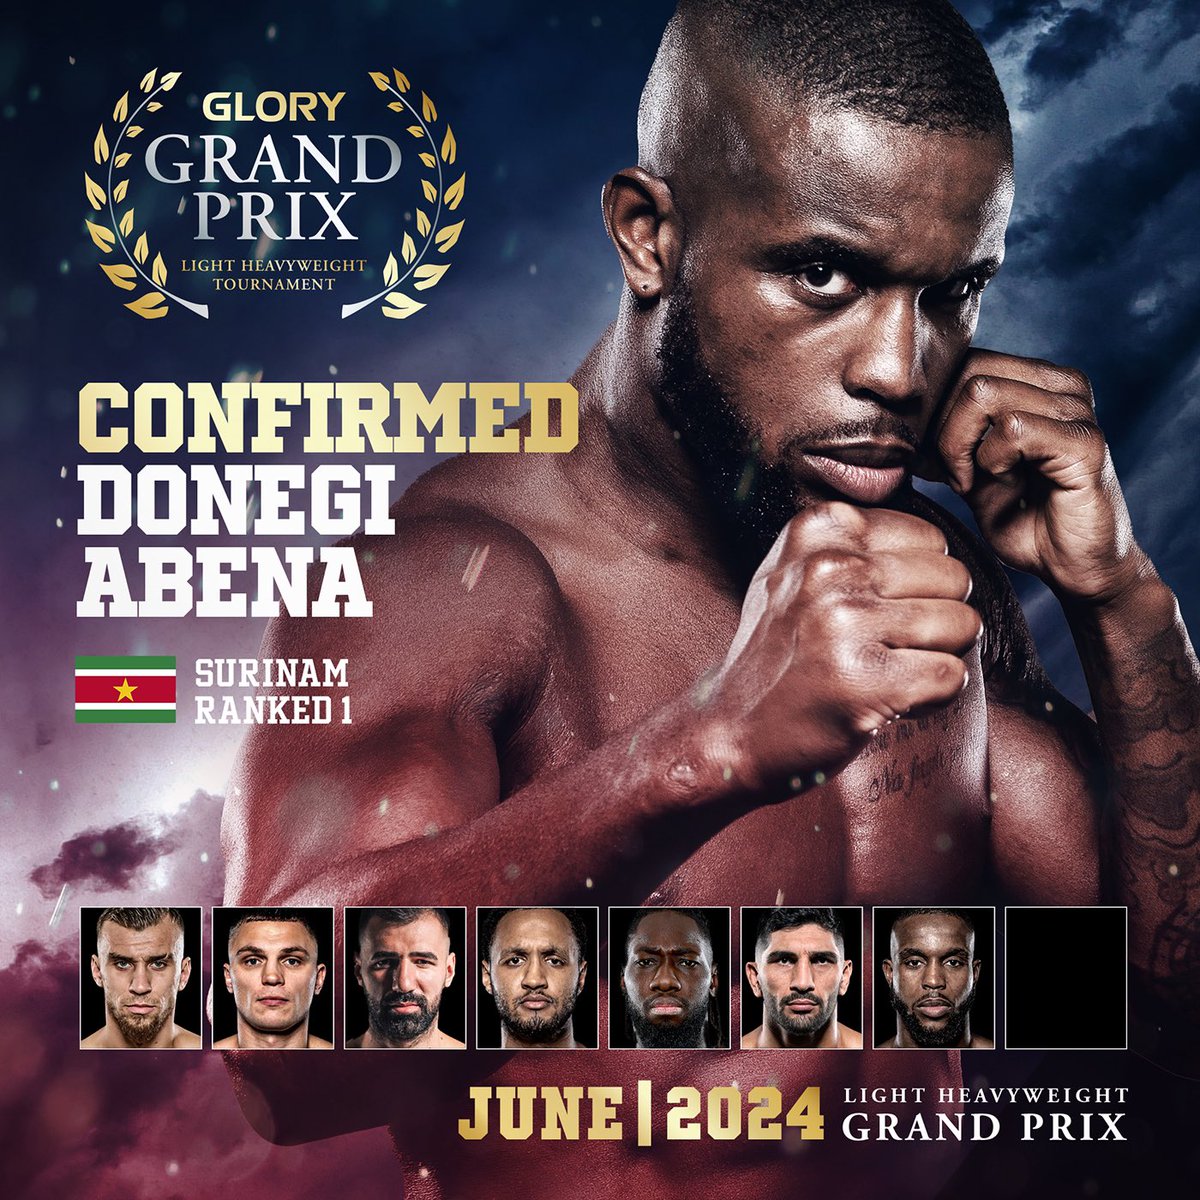 Donegi Abena is confirmed to join the GLORY Light Heavyweight Grand Prix on June 8!